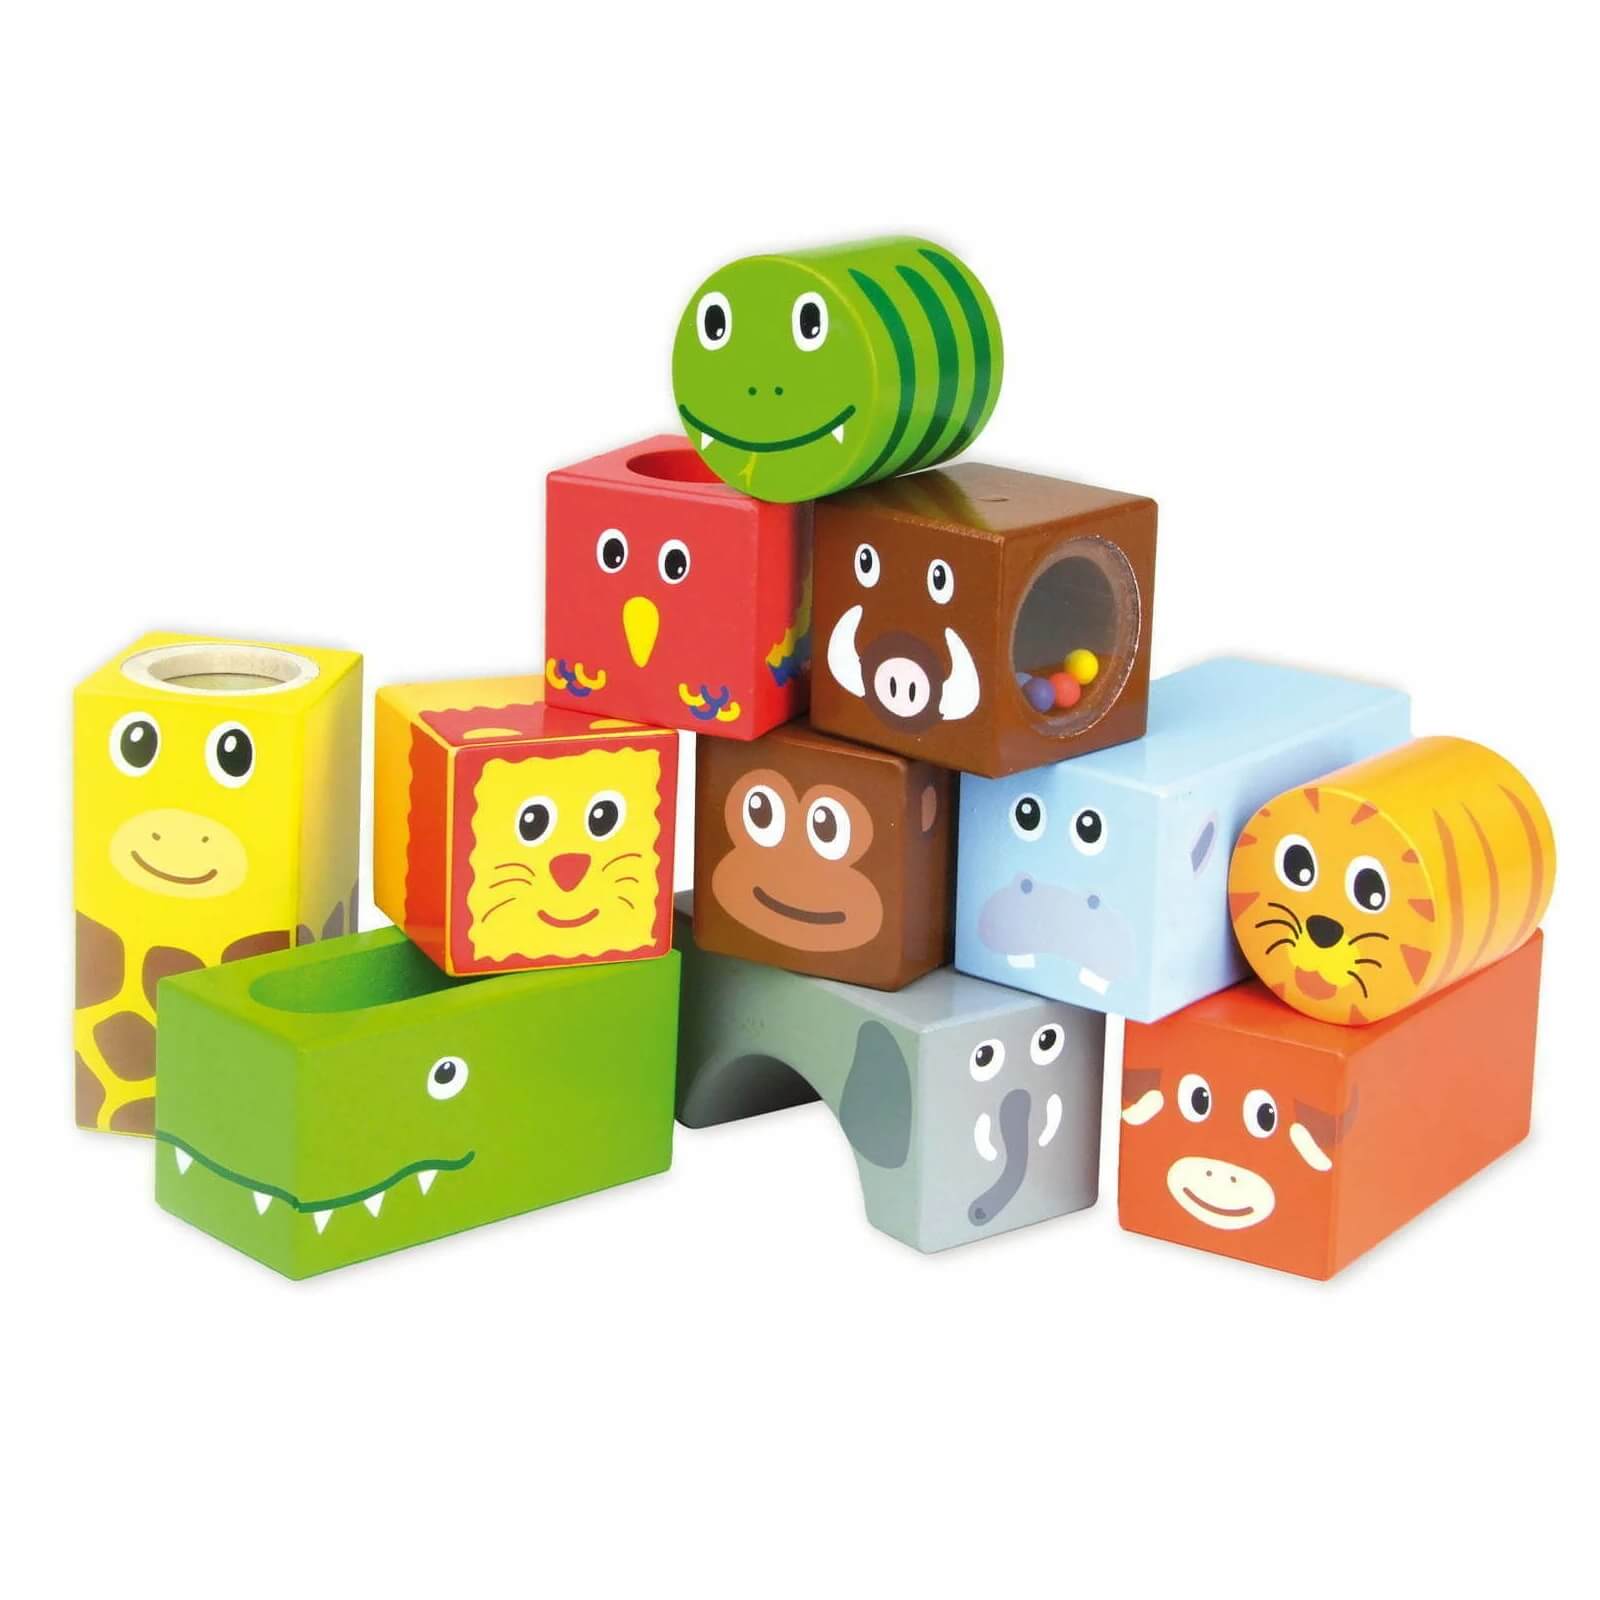 Vilac Savannah Musical Blocks made to keep your child entertained with sound No need for batteries or electronics as the blocks create soft noises that are the perfect volume for a child.